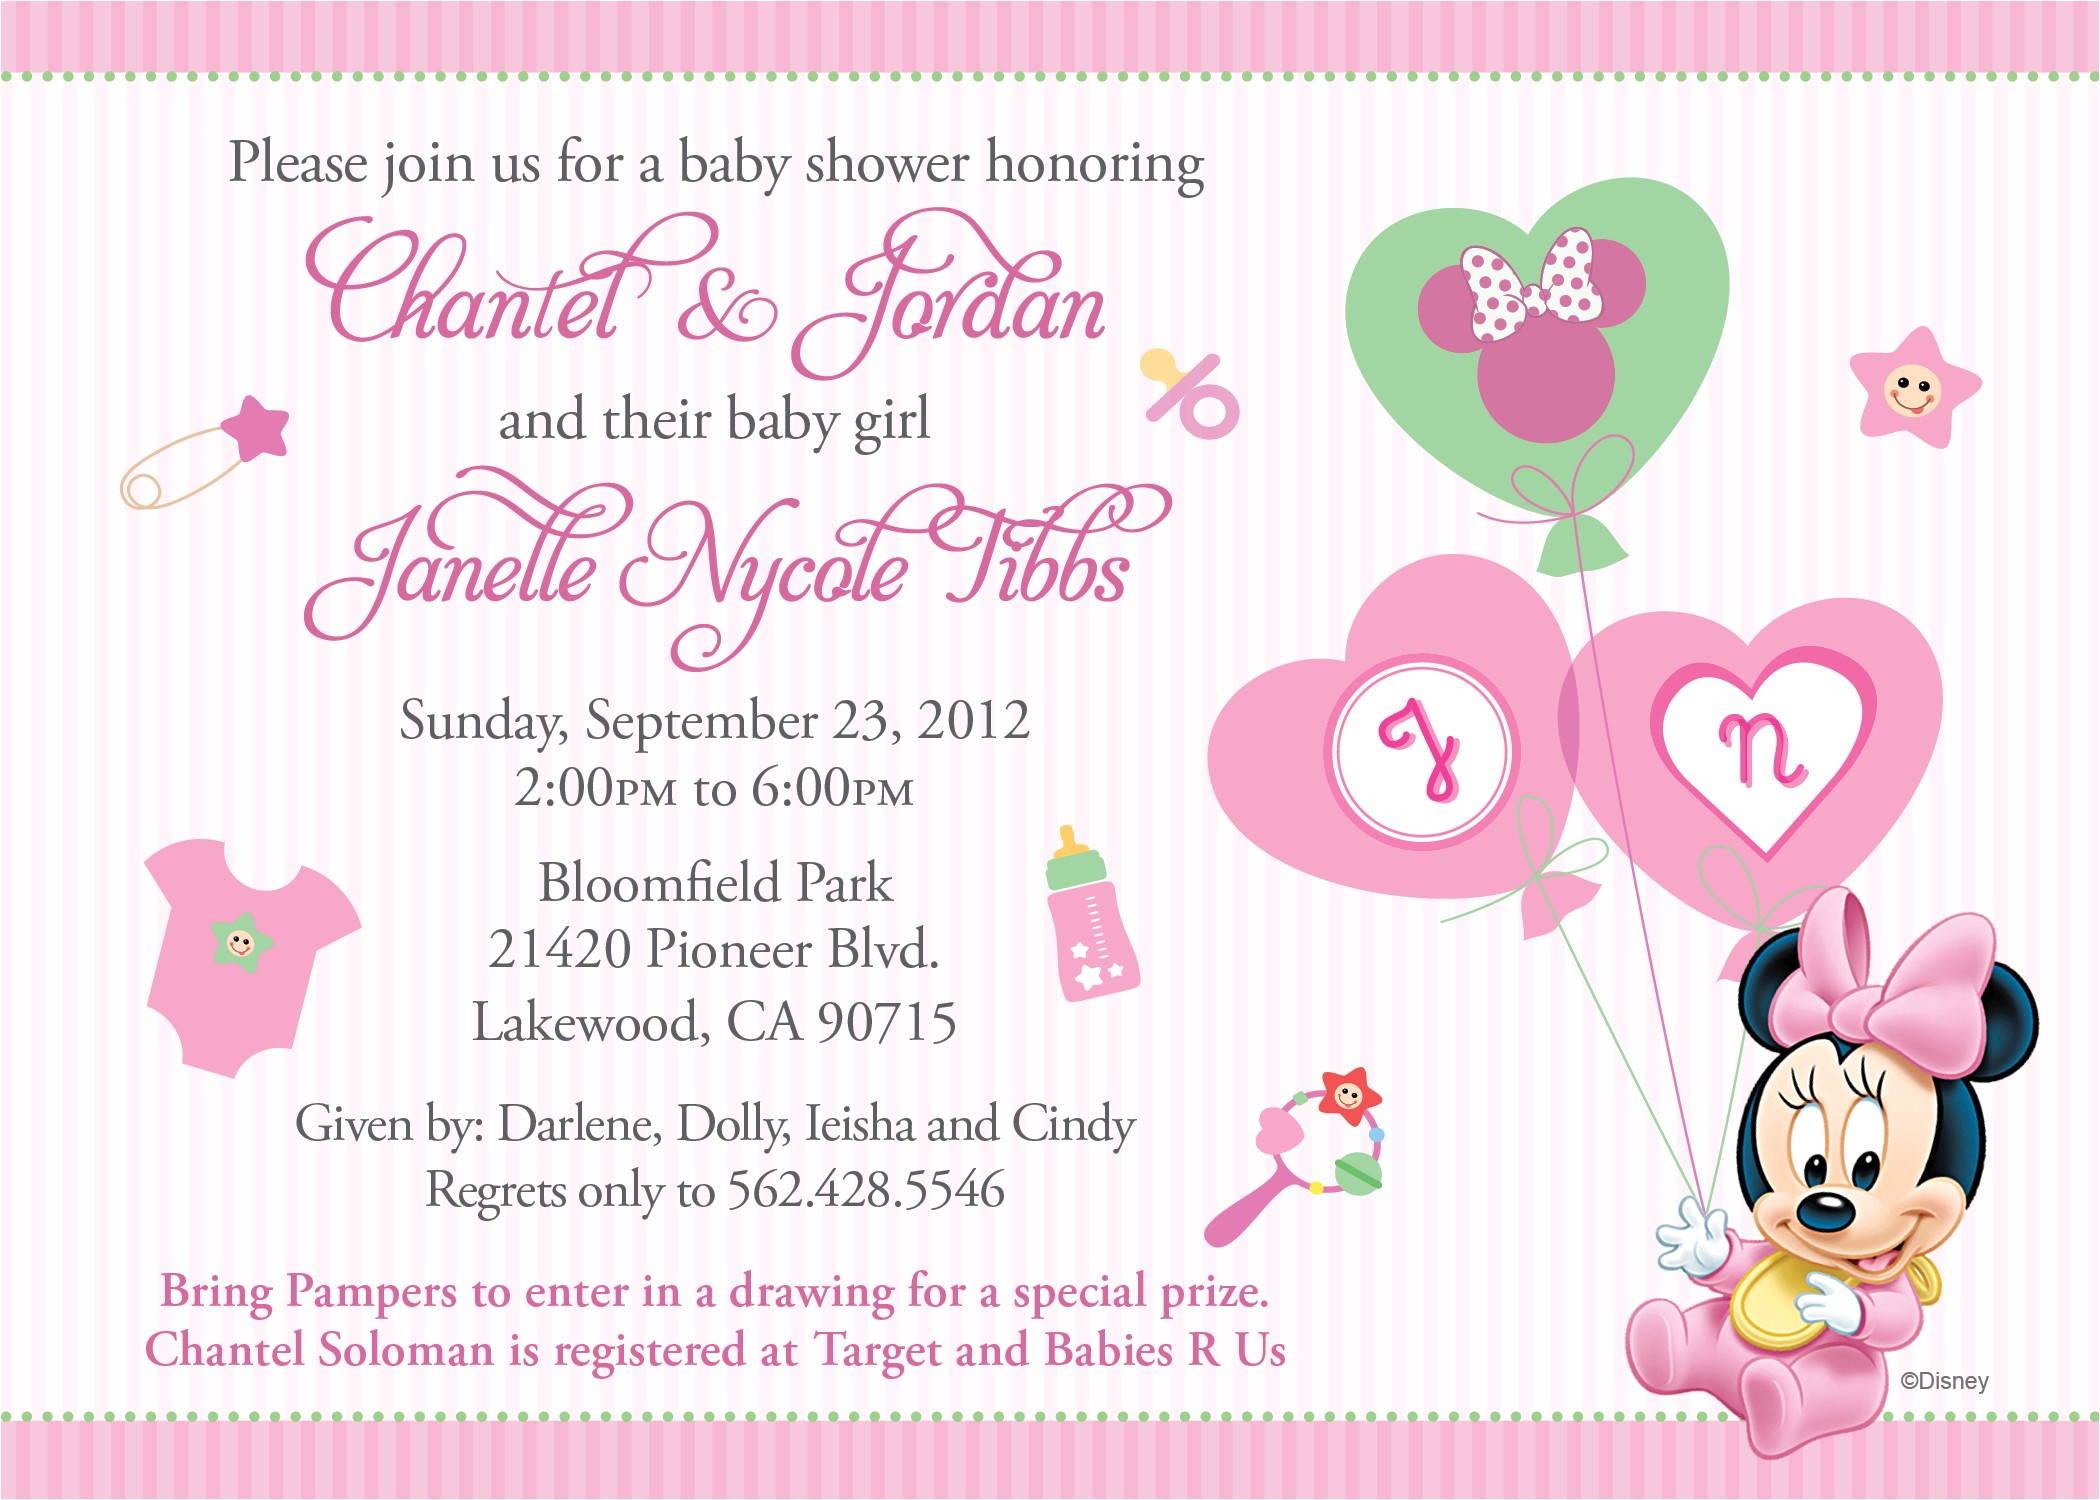 Create Your Own Baby Shower Invitations Online Design Your Own Baby Shower Invitations Line